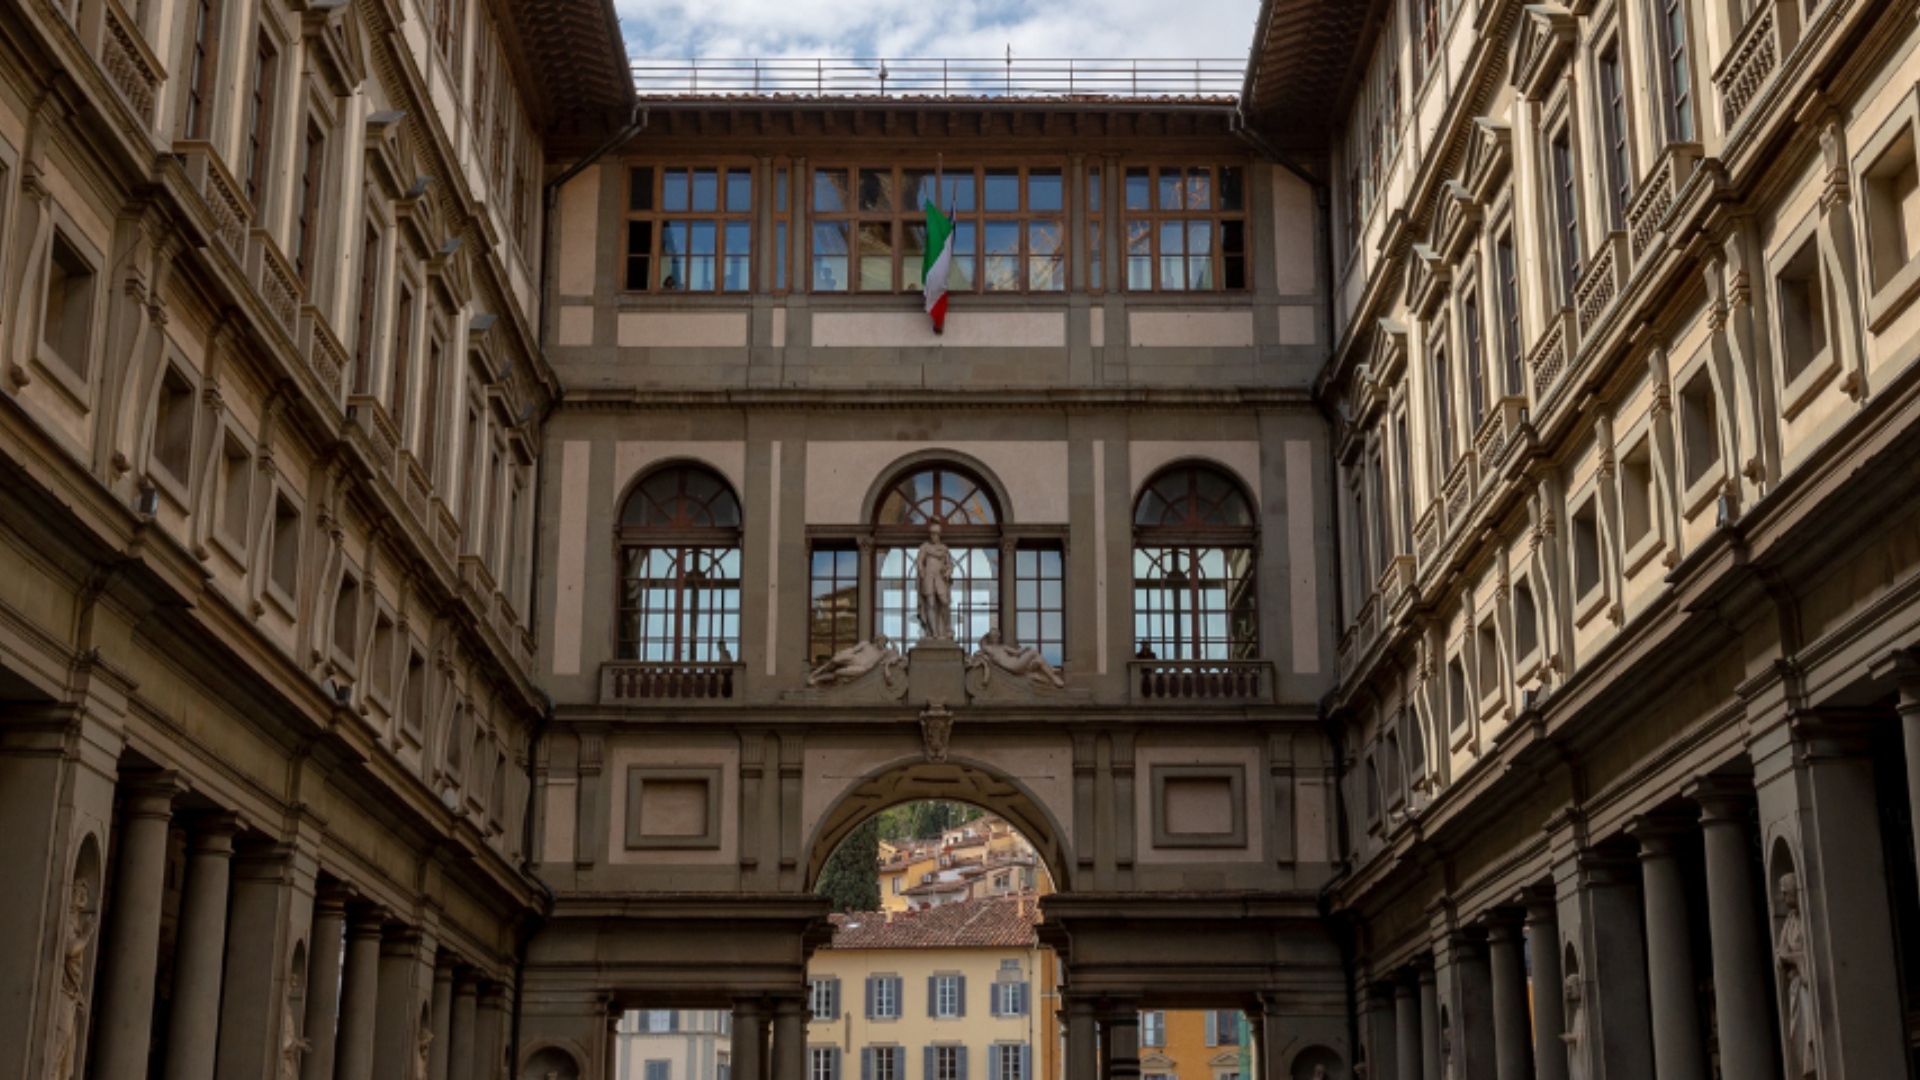 Internal loggia of the Uffizi Museum in Florence during the Smart Tour